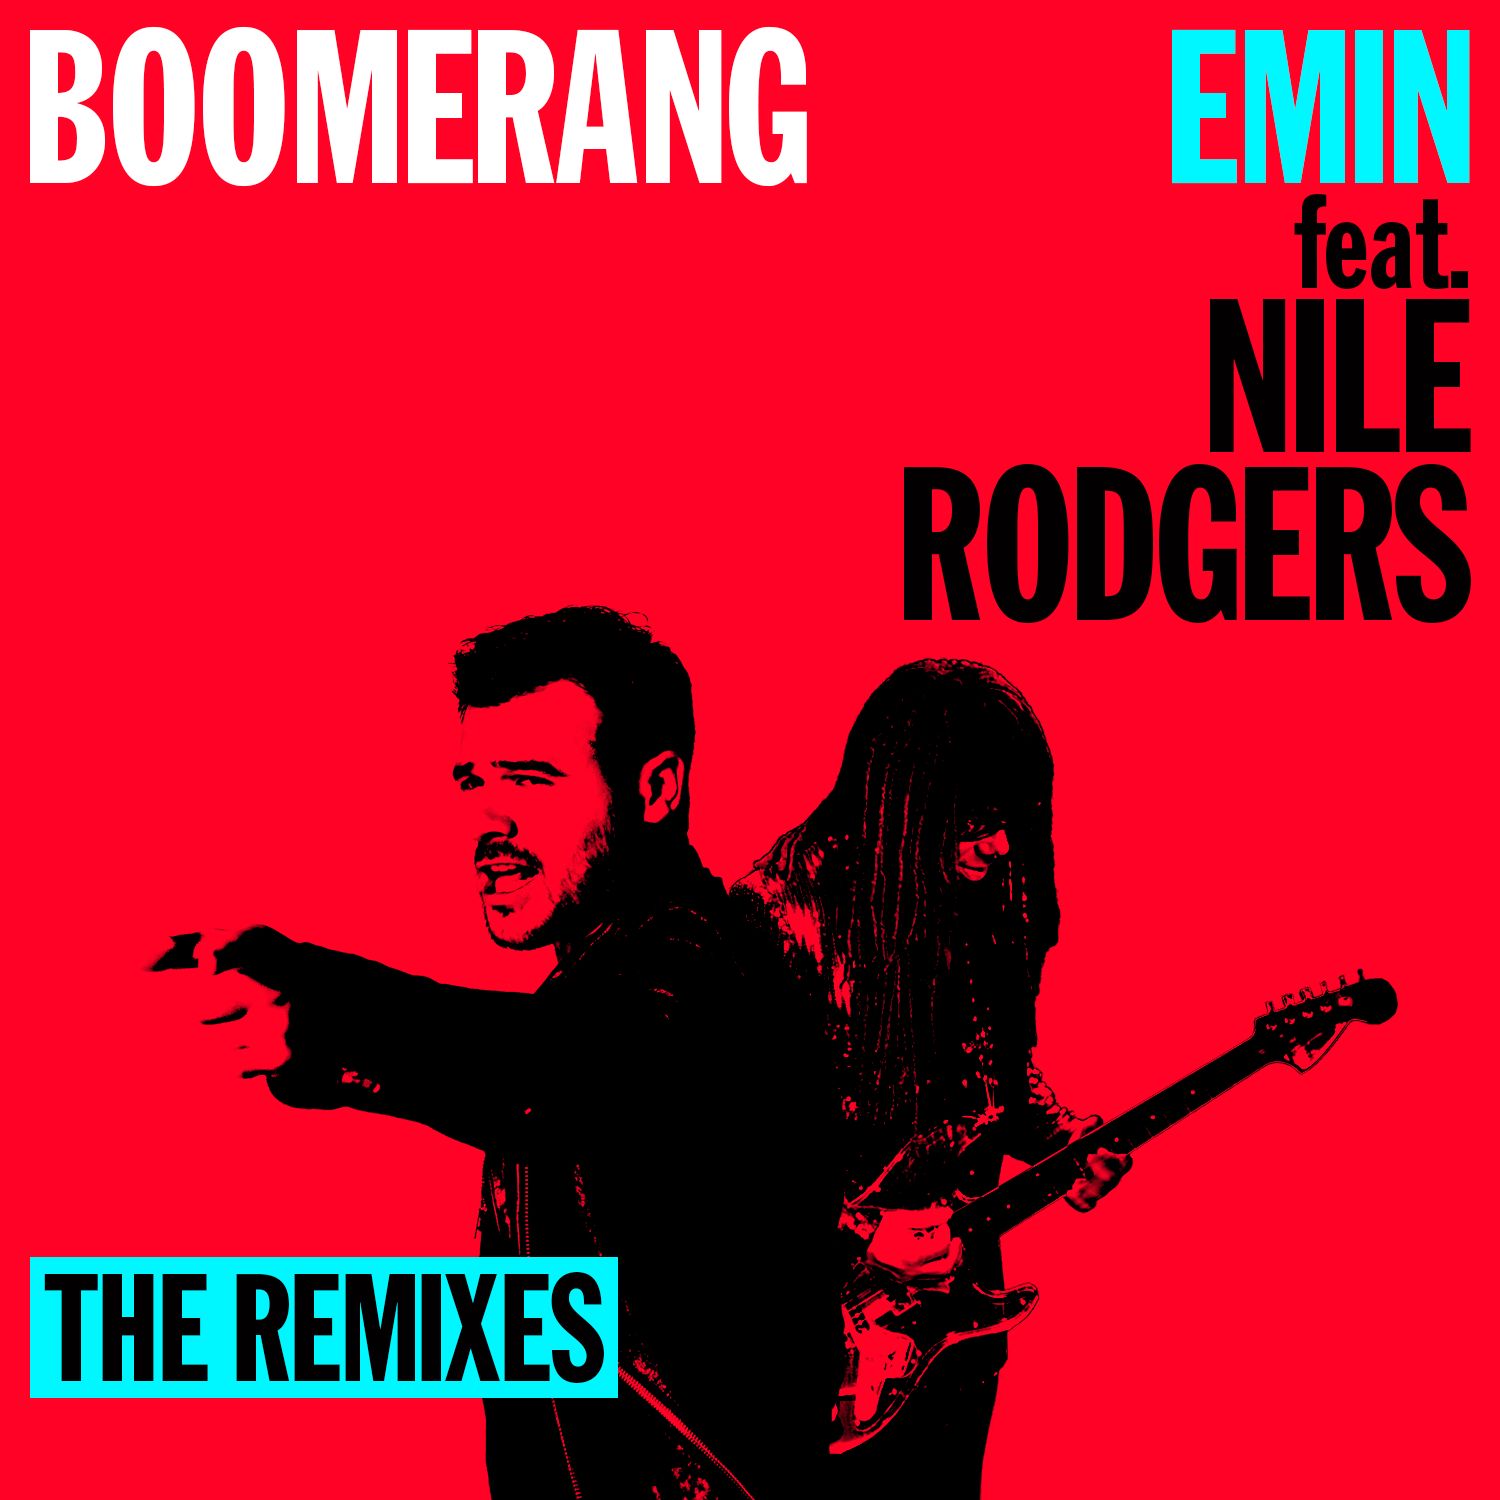 Boomerang (feat. Nile Rodgers) - The Remixes